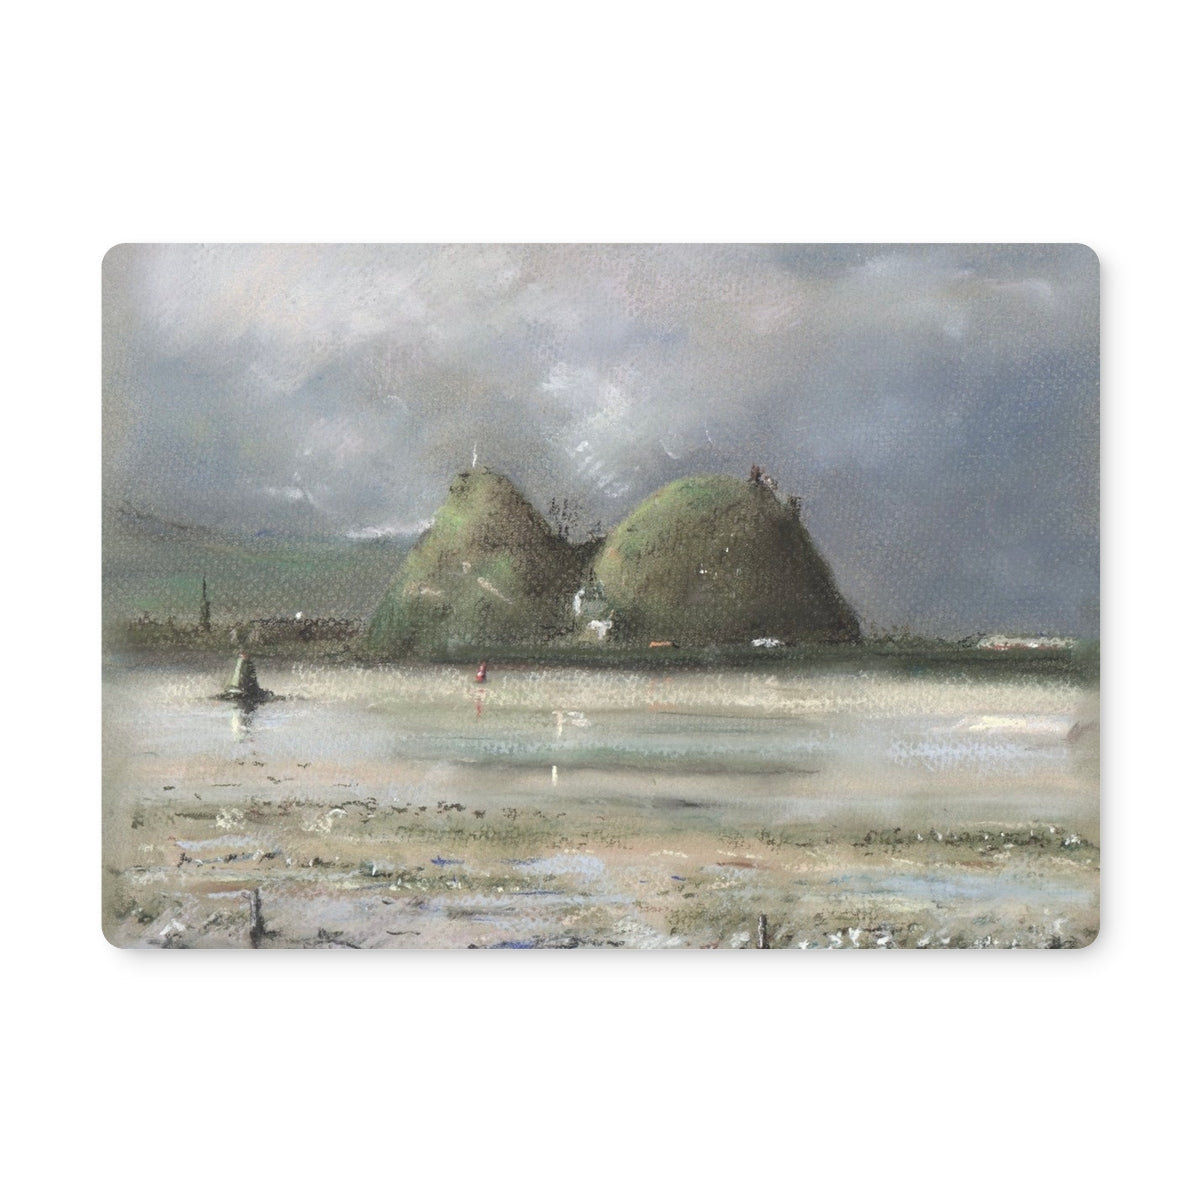 Dumbarton Rock Art Gifts Placemat-Placemats-River Clyde Art Gallery-2 Placemats-Paintings, Prints, Homeware, Art Gifts From Scotland By Scottish Artist Kevin Hunter